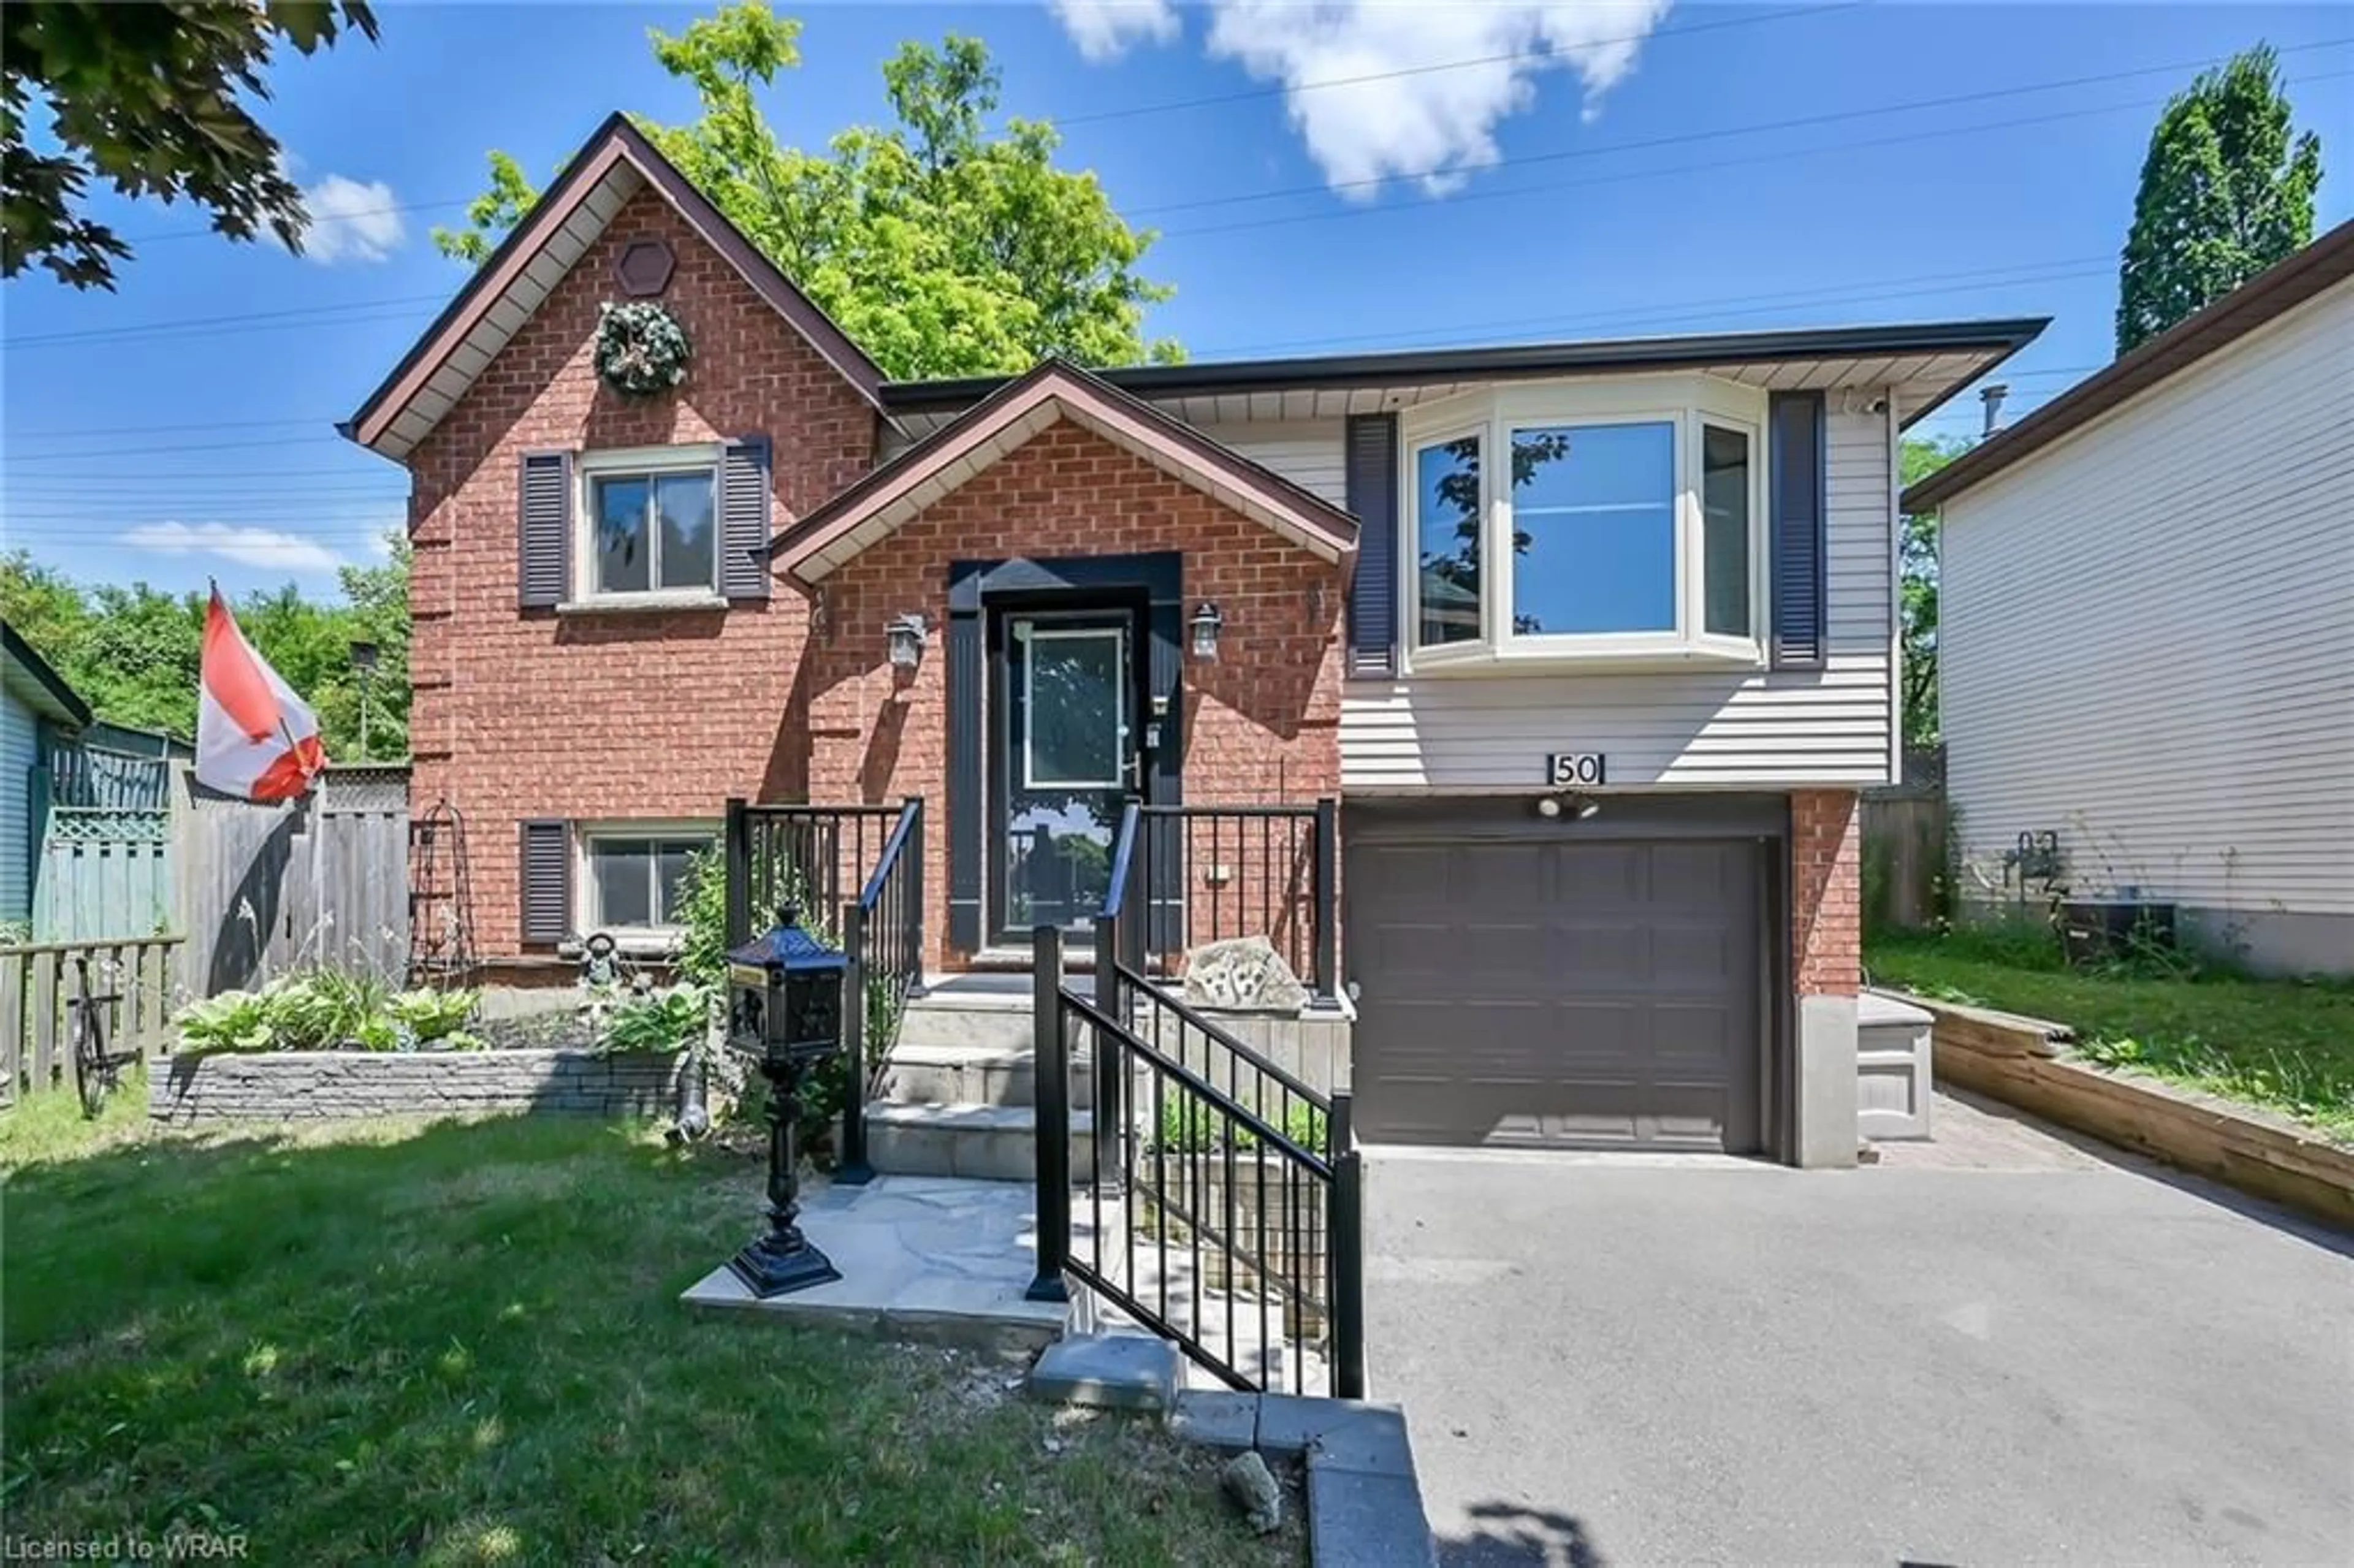 Home with brick exterior material for 50 Woodborough Pl, Cambridge Ontario N1R 7X1